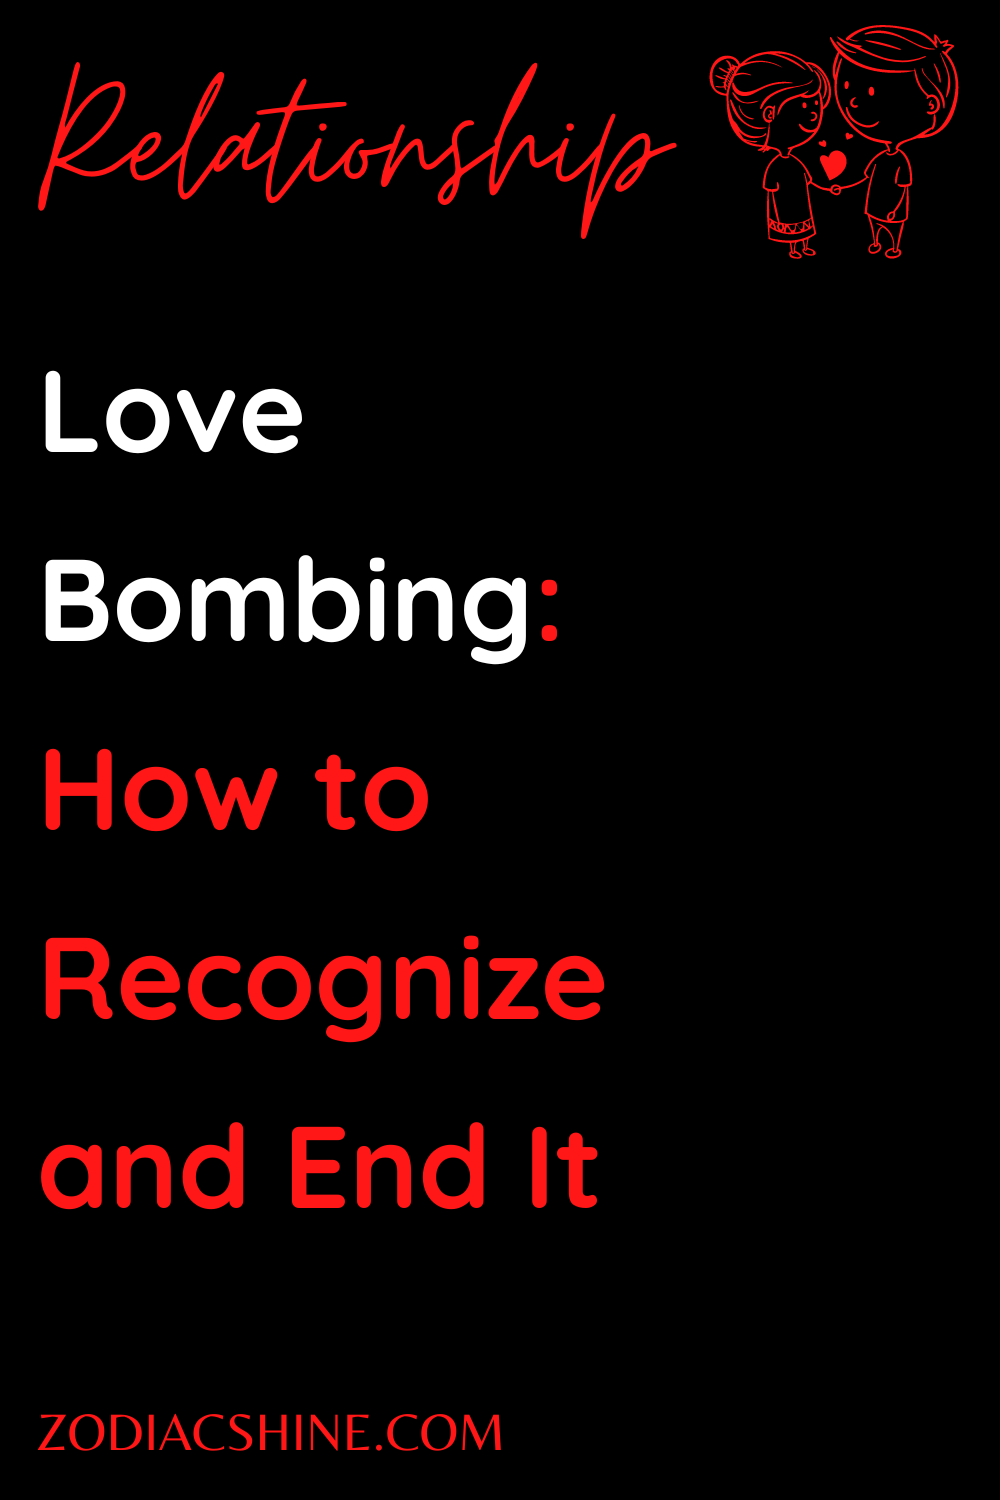 Love Bombing: How to Recognize and End It